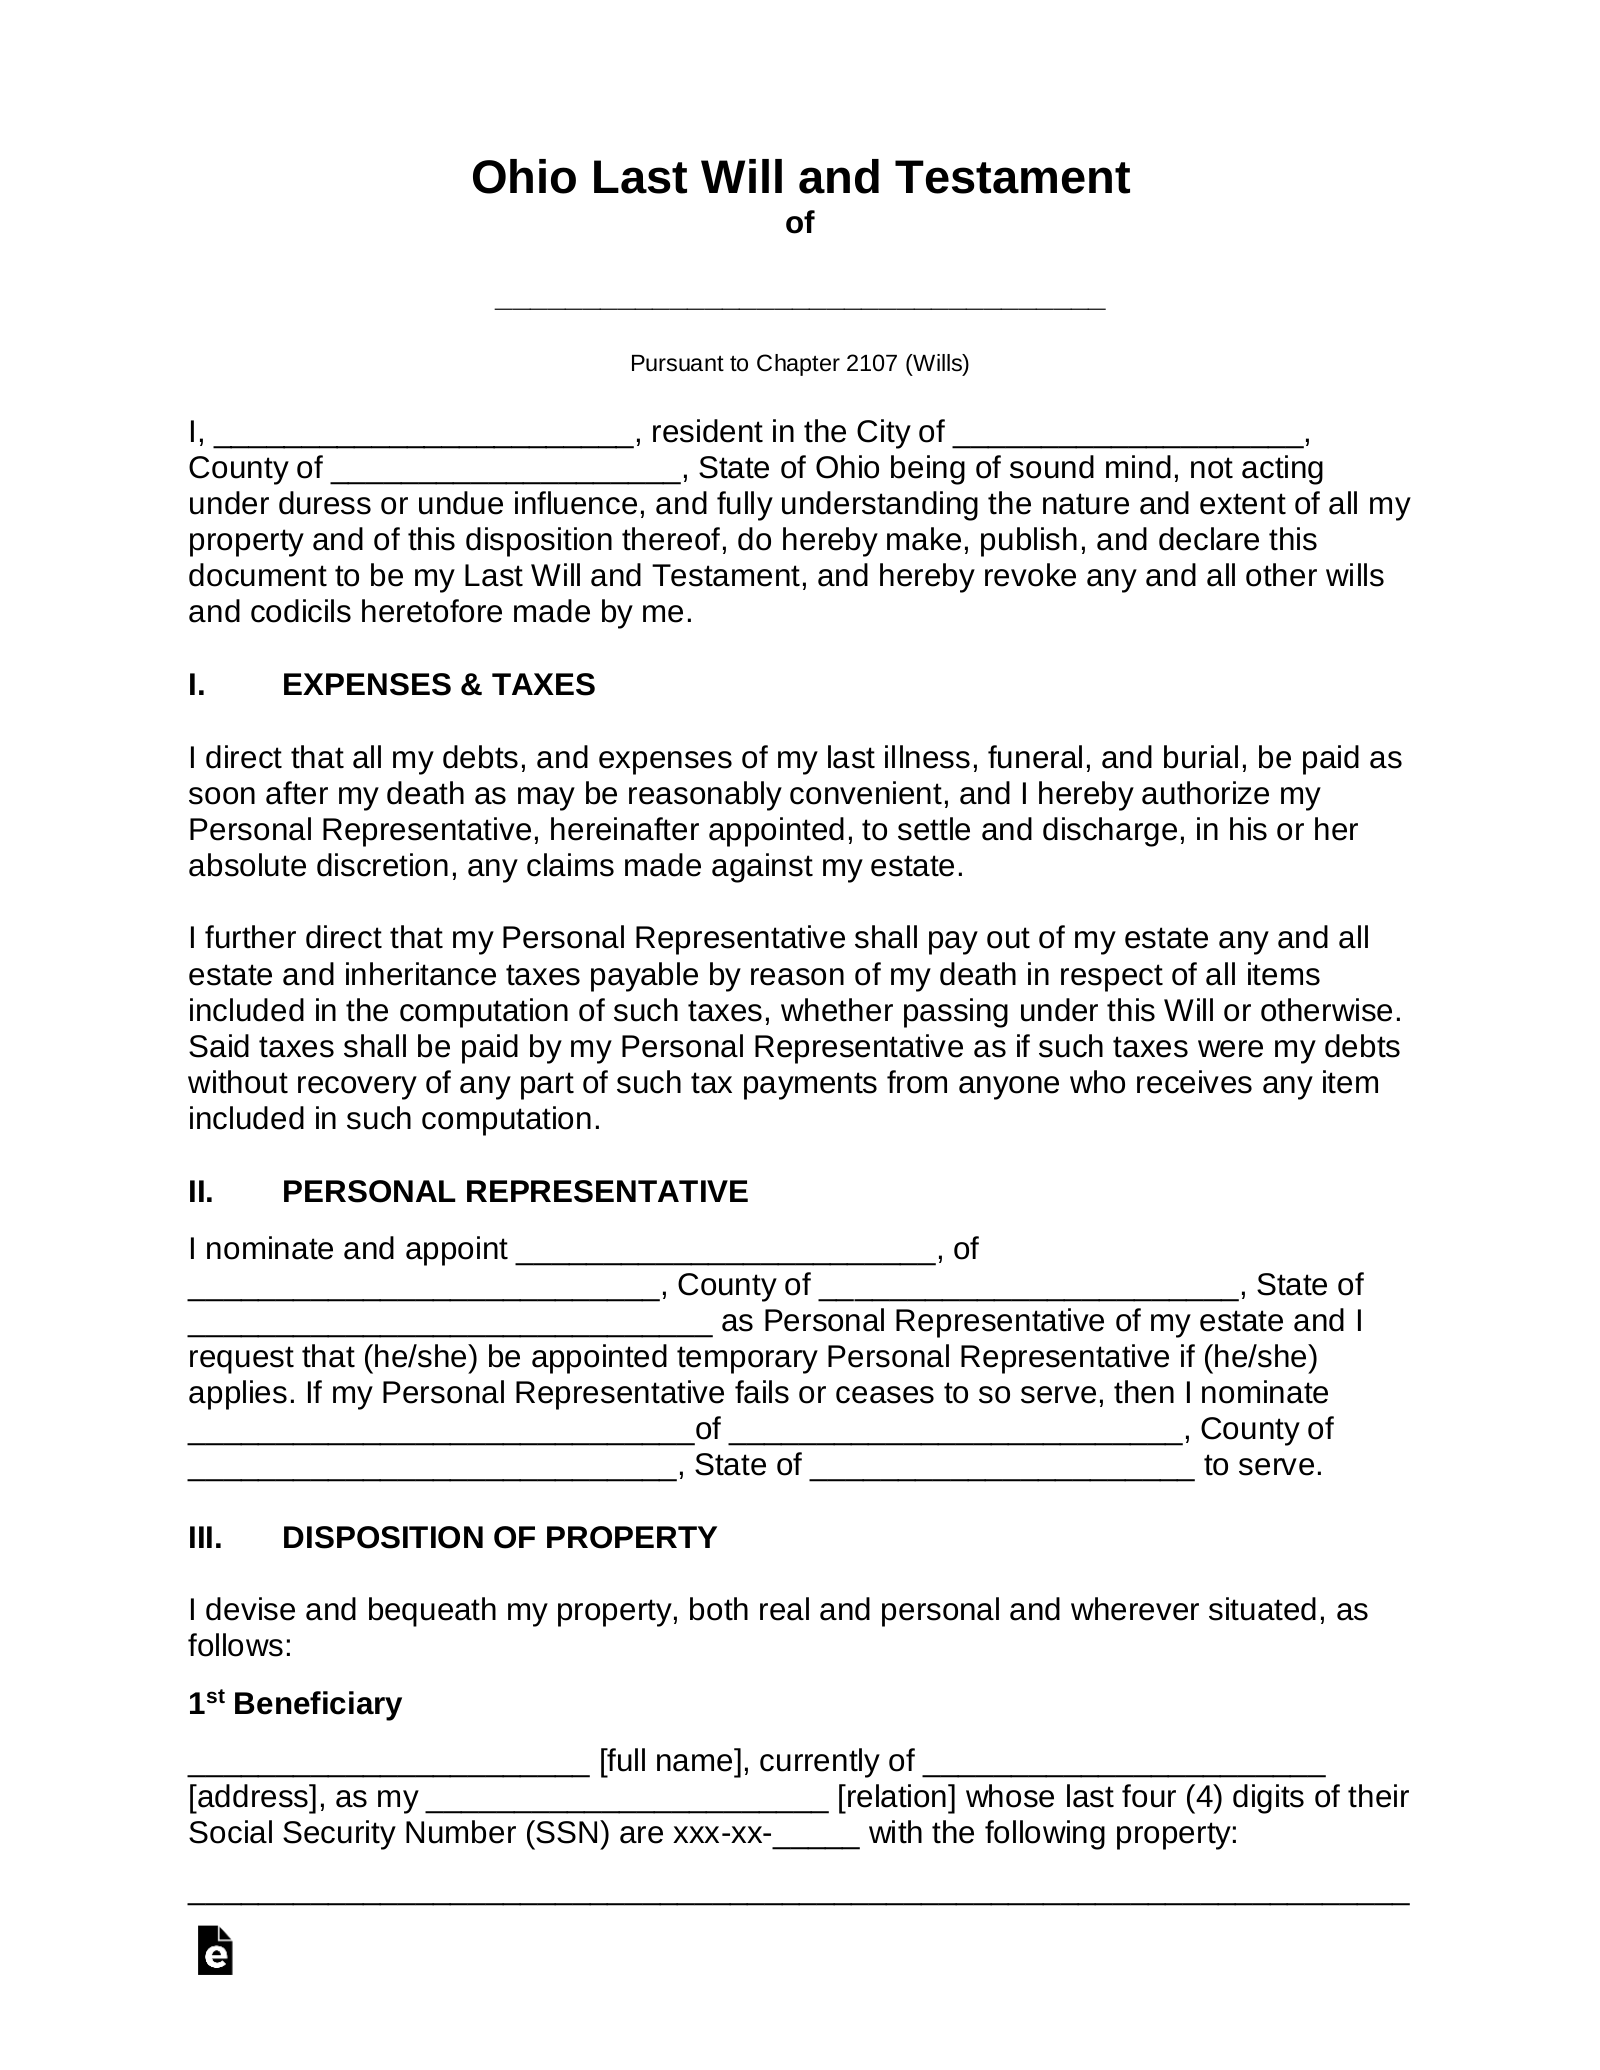 Free Ohio Last Will and Testament Template - PDF  Word – eForms